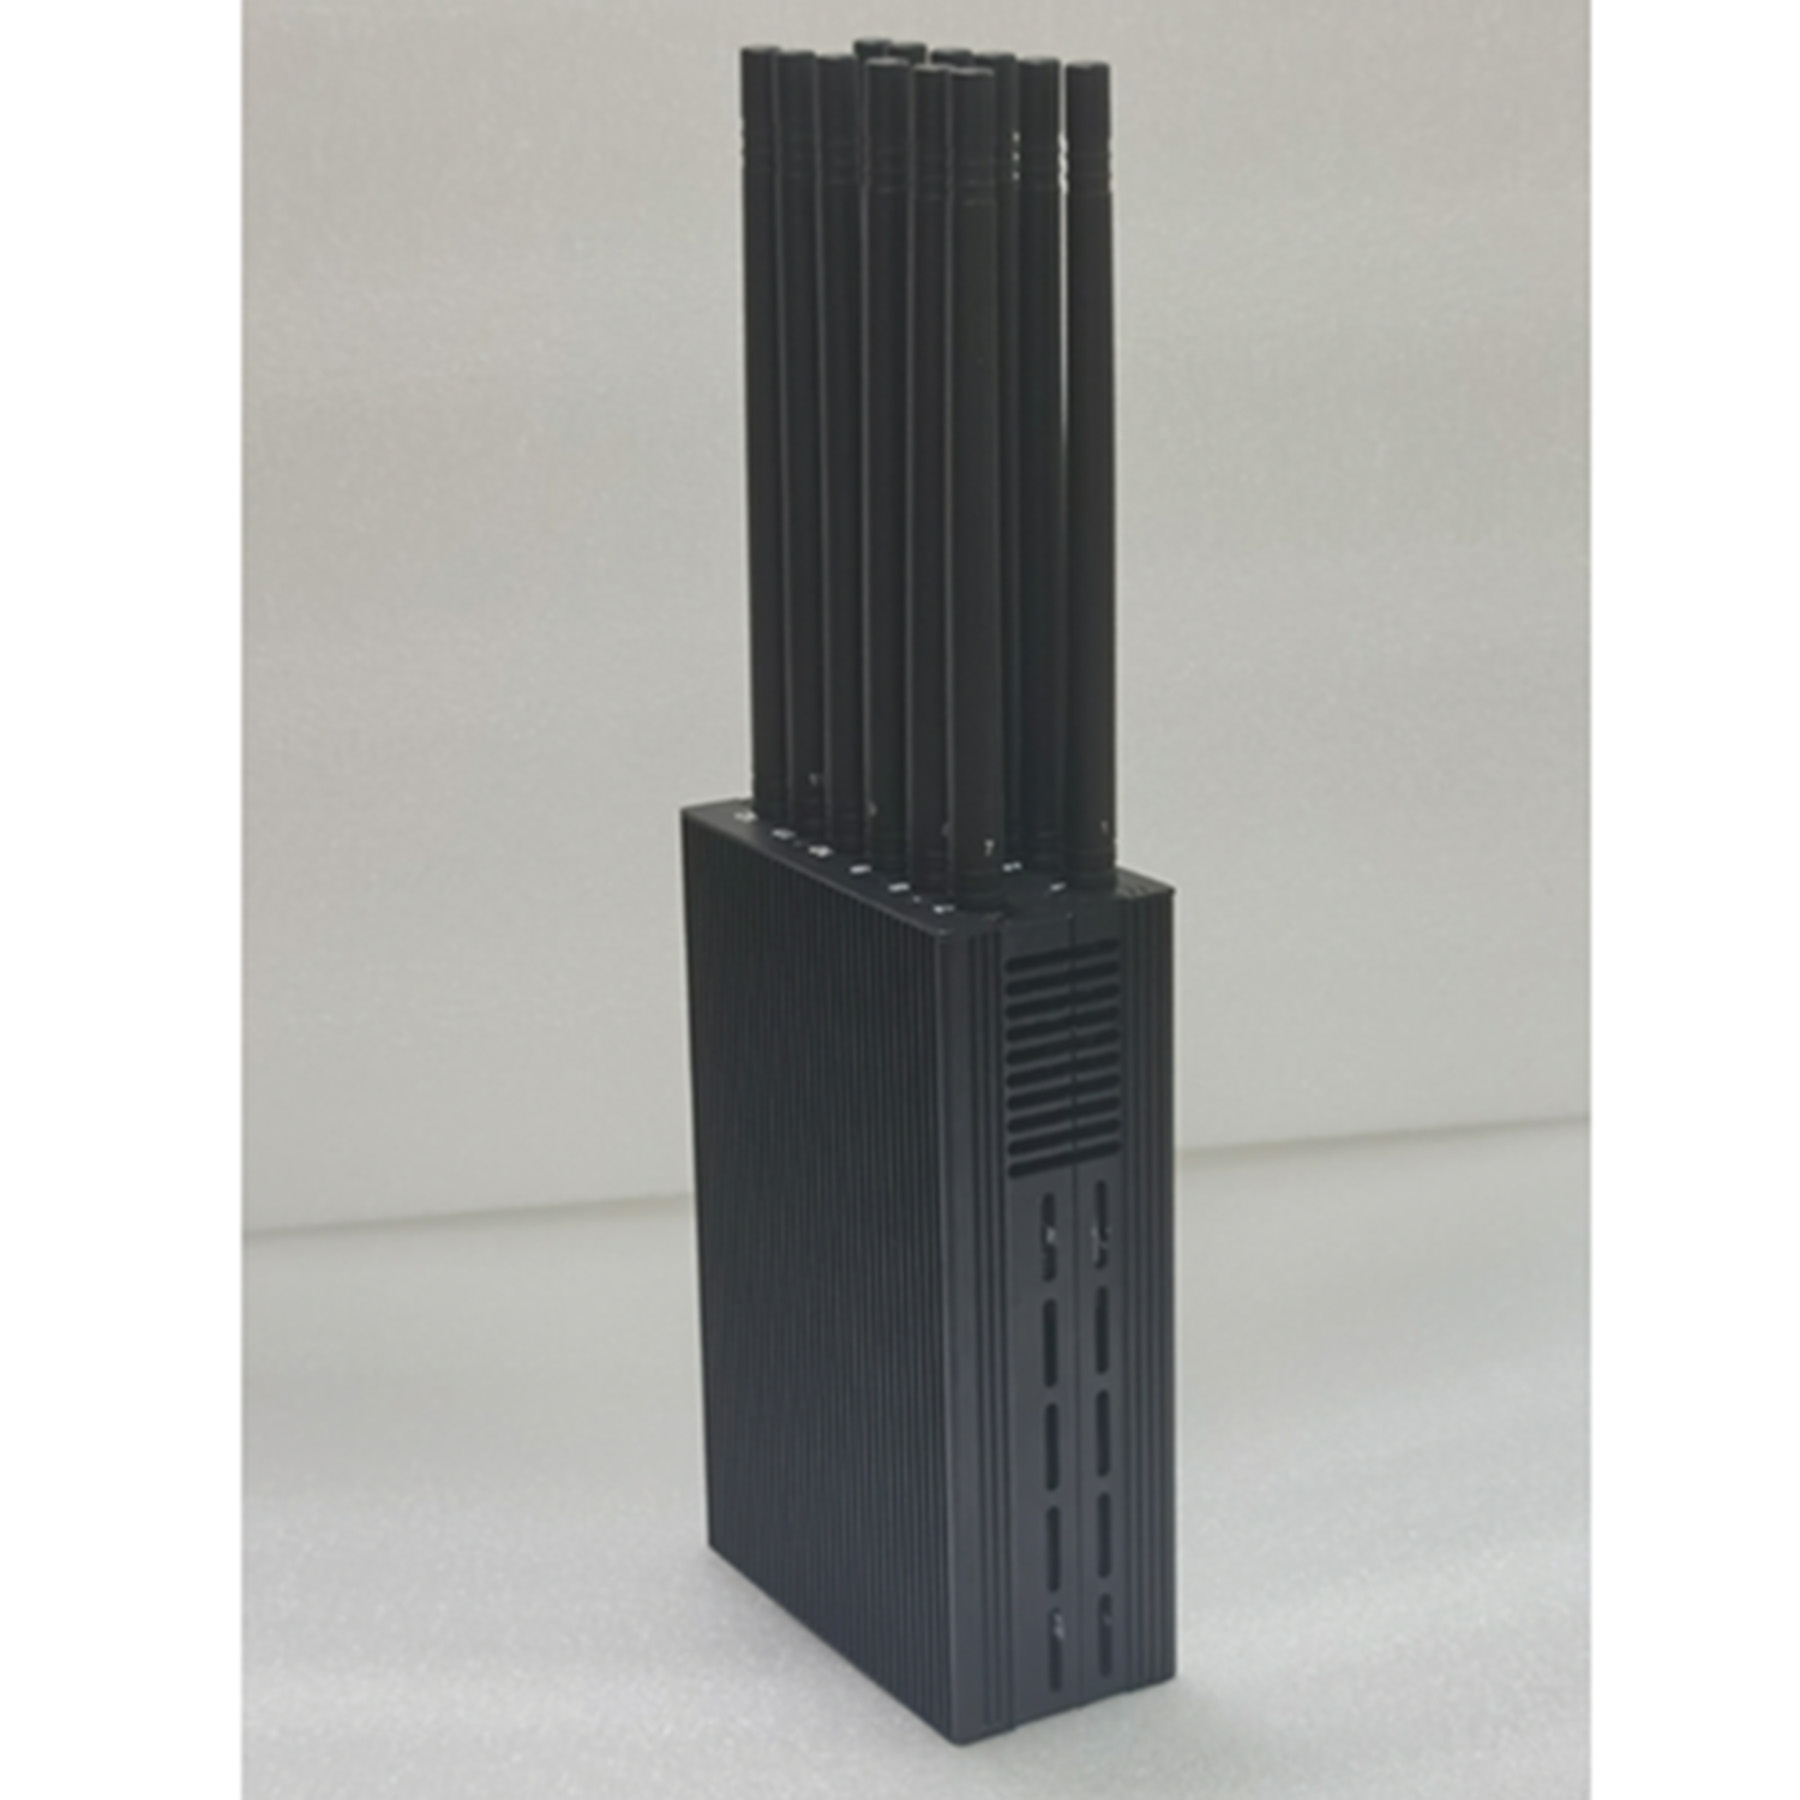 Portable cell phone jammer